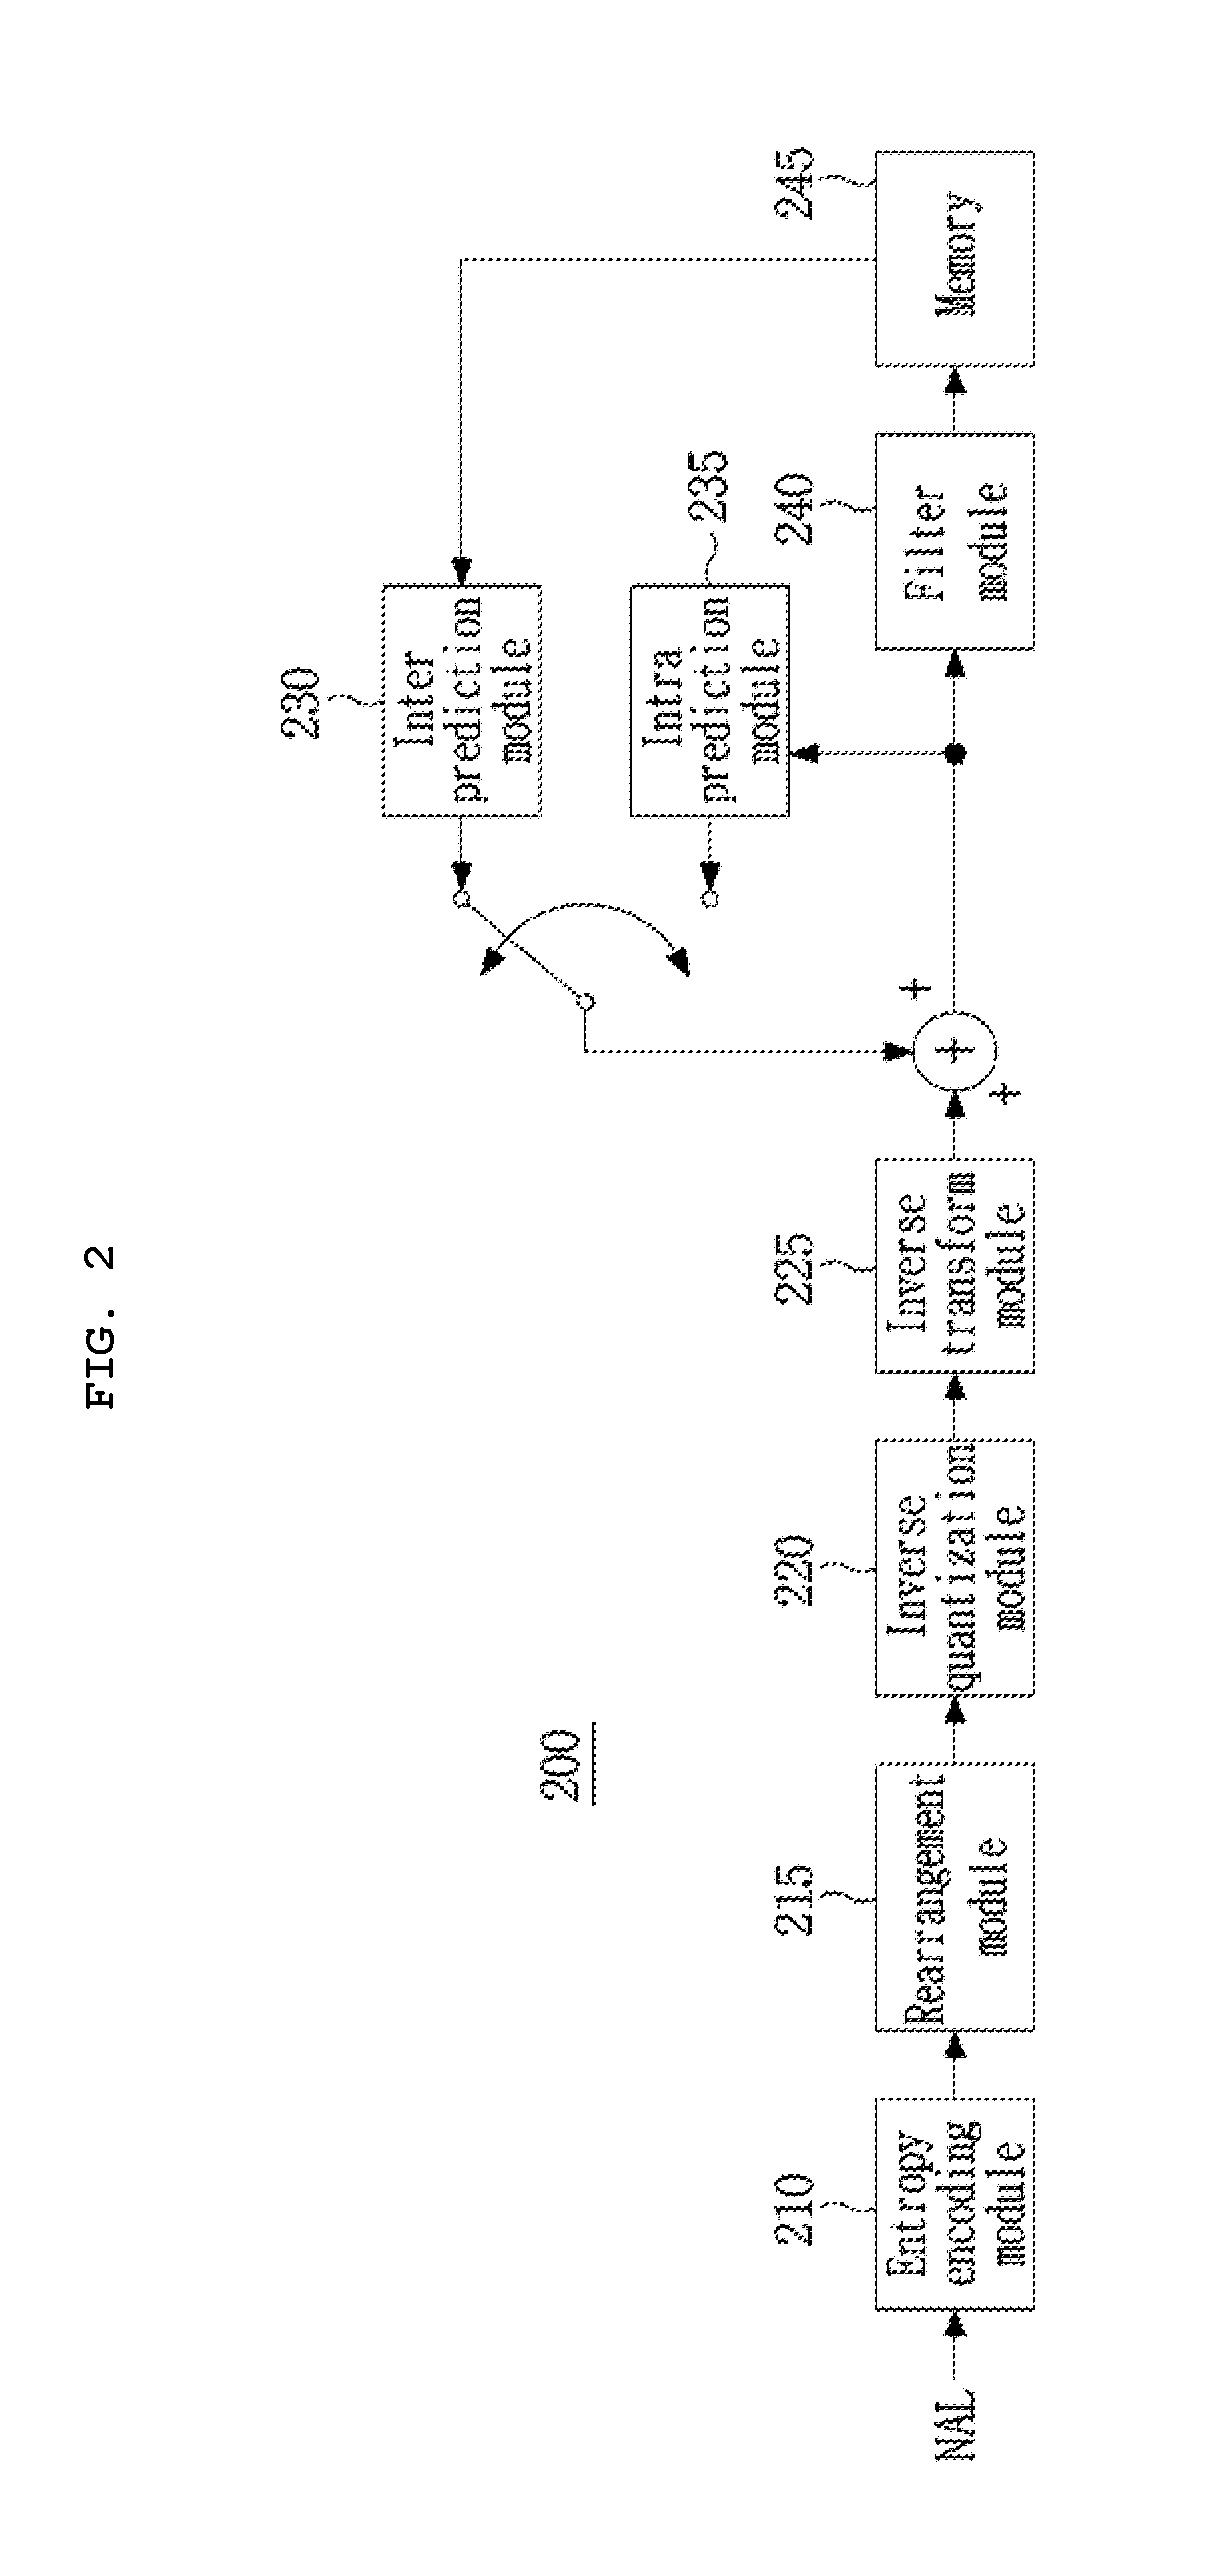 Video signal processing method and device